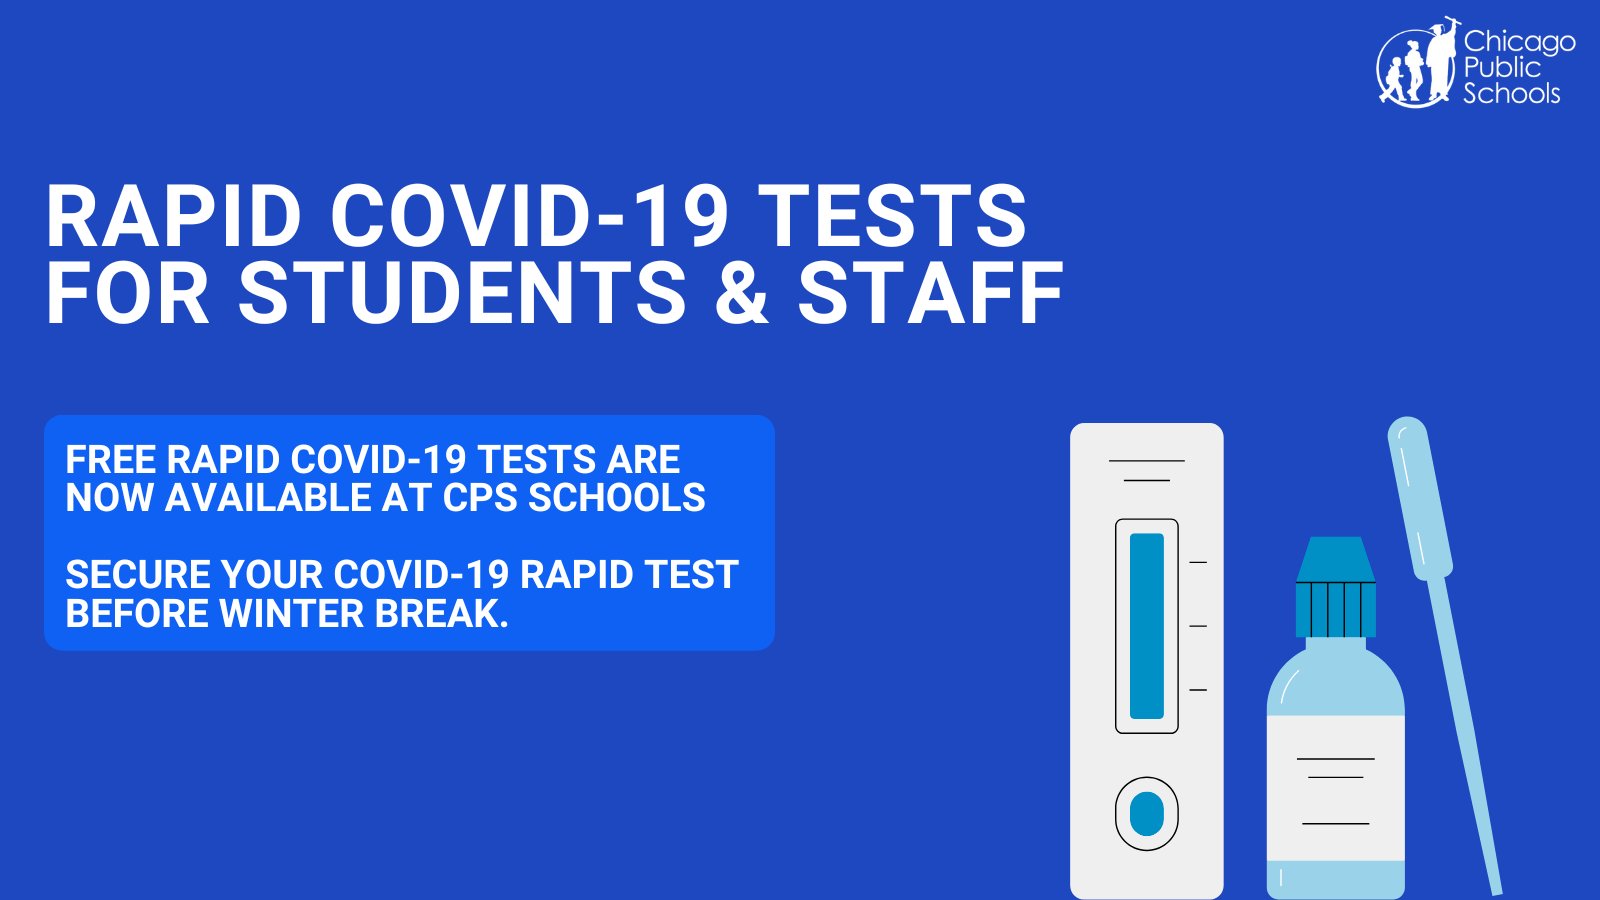 Sign up your CPS student to get COVID tested by CPS - Chicago